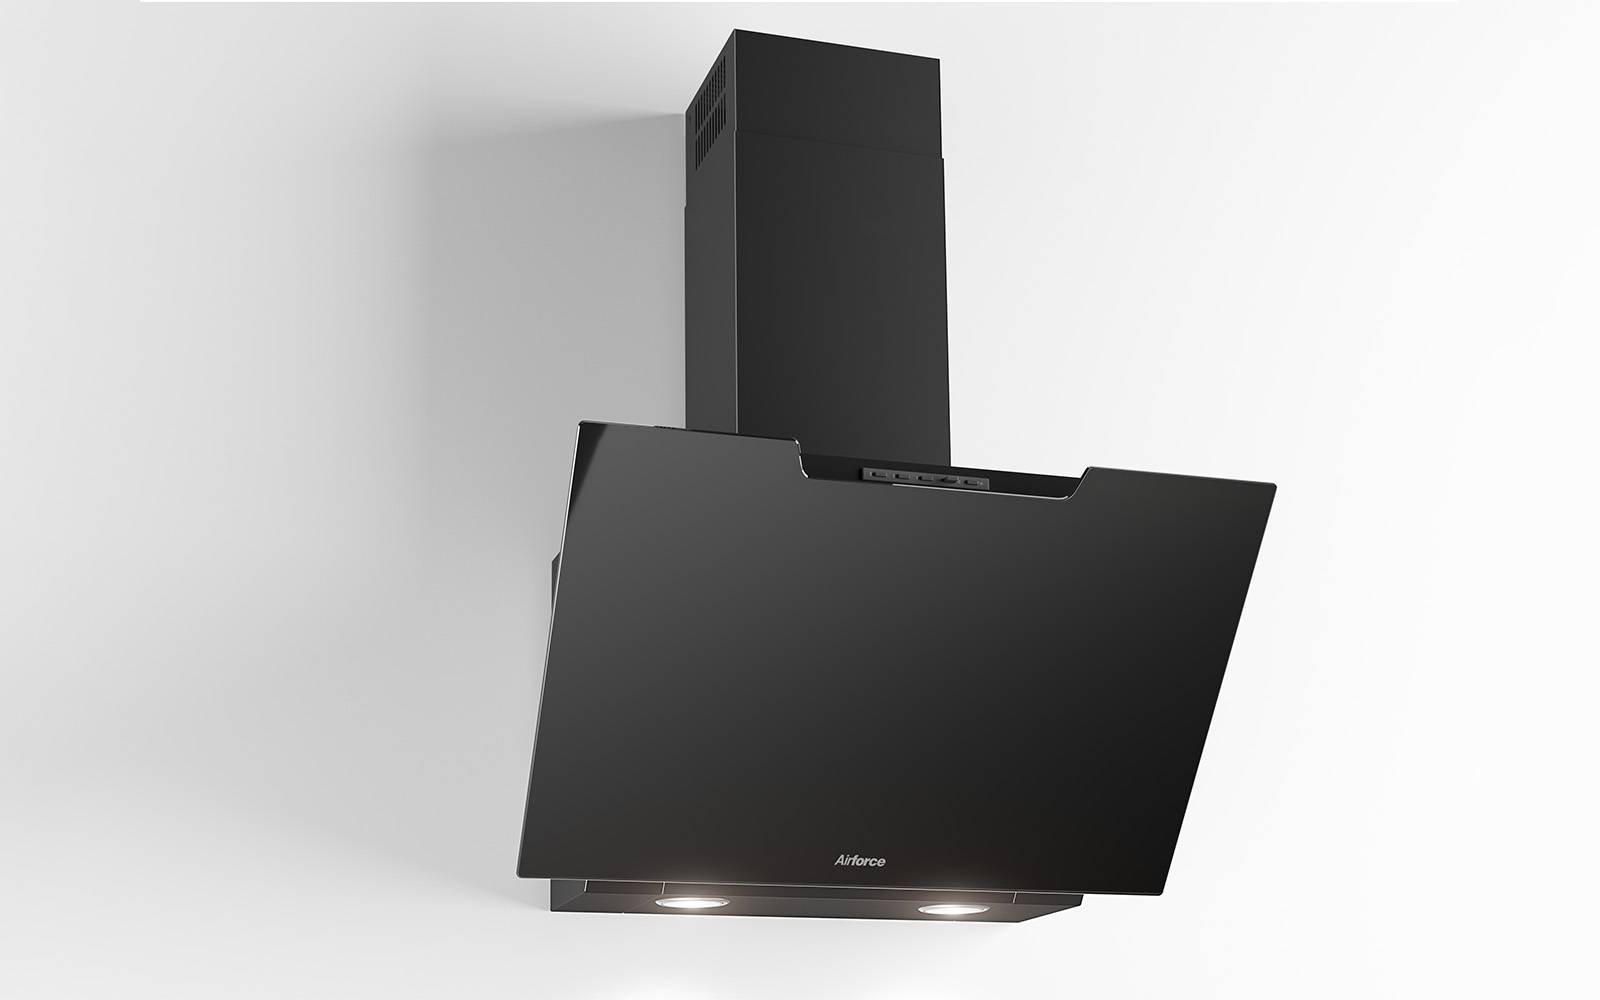 Airforce F212 60cm Wall Mounted Cooker hood with Soft push button control-Black Glass Finish